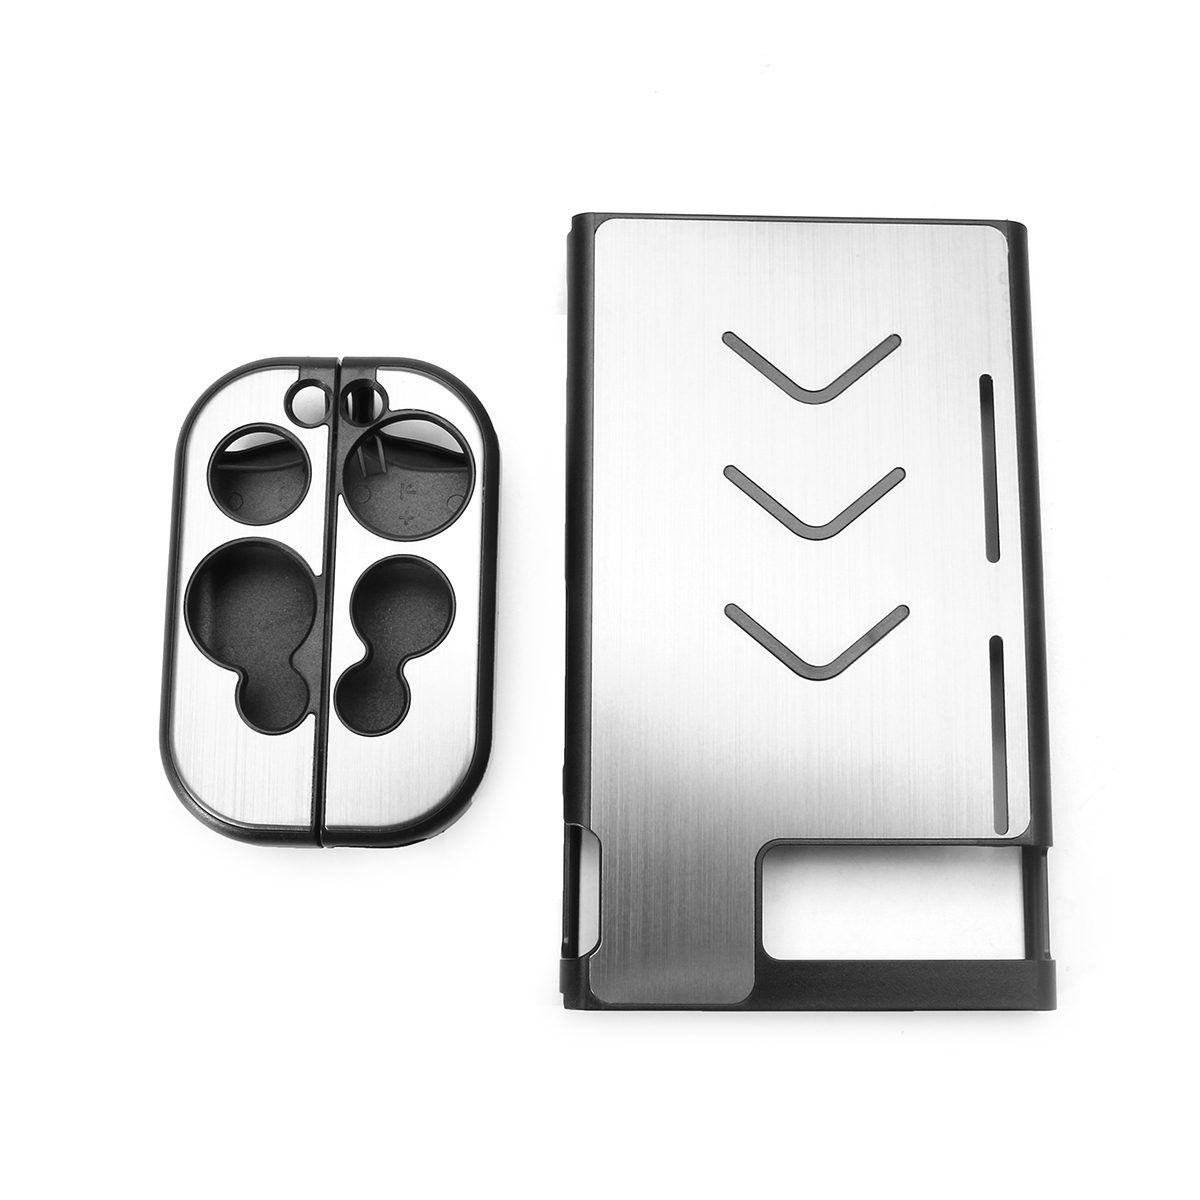 Replacement Accessories Housing Shell Case Protective For Nintendo Switch Controller Joy-con 20